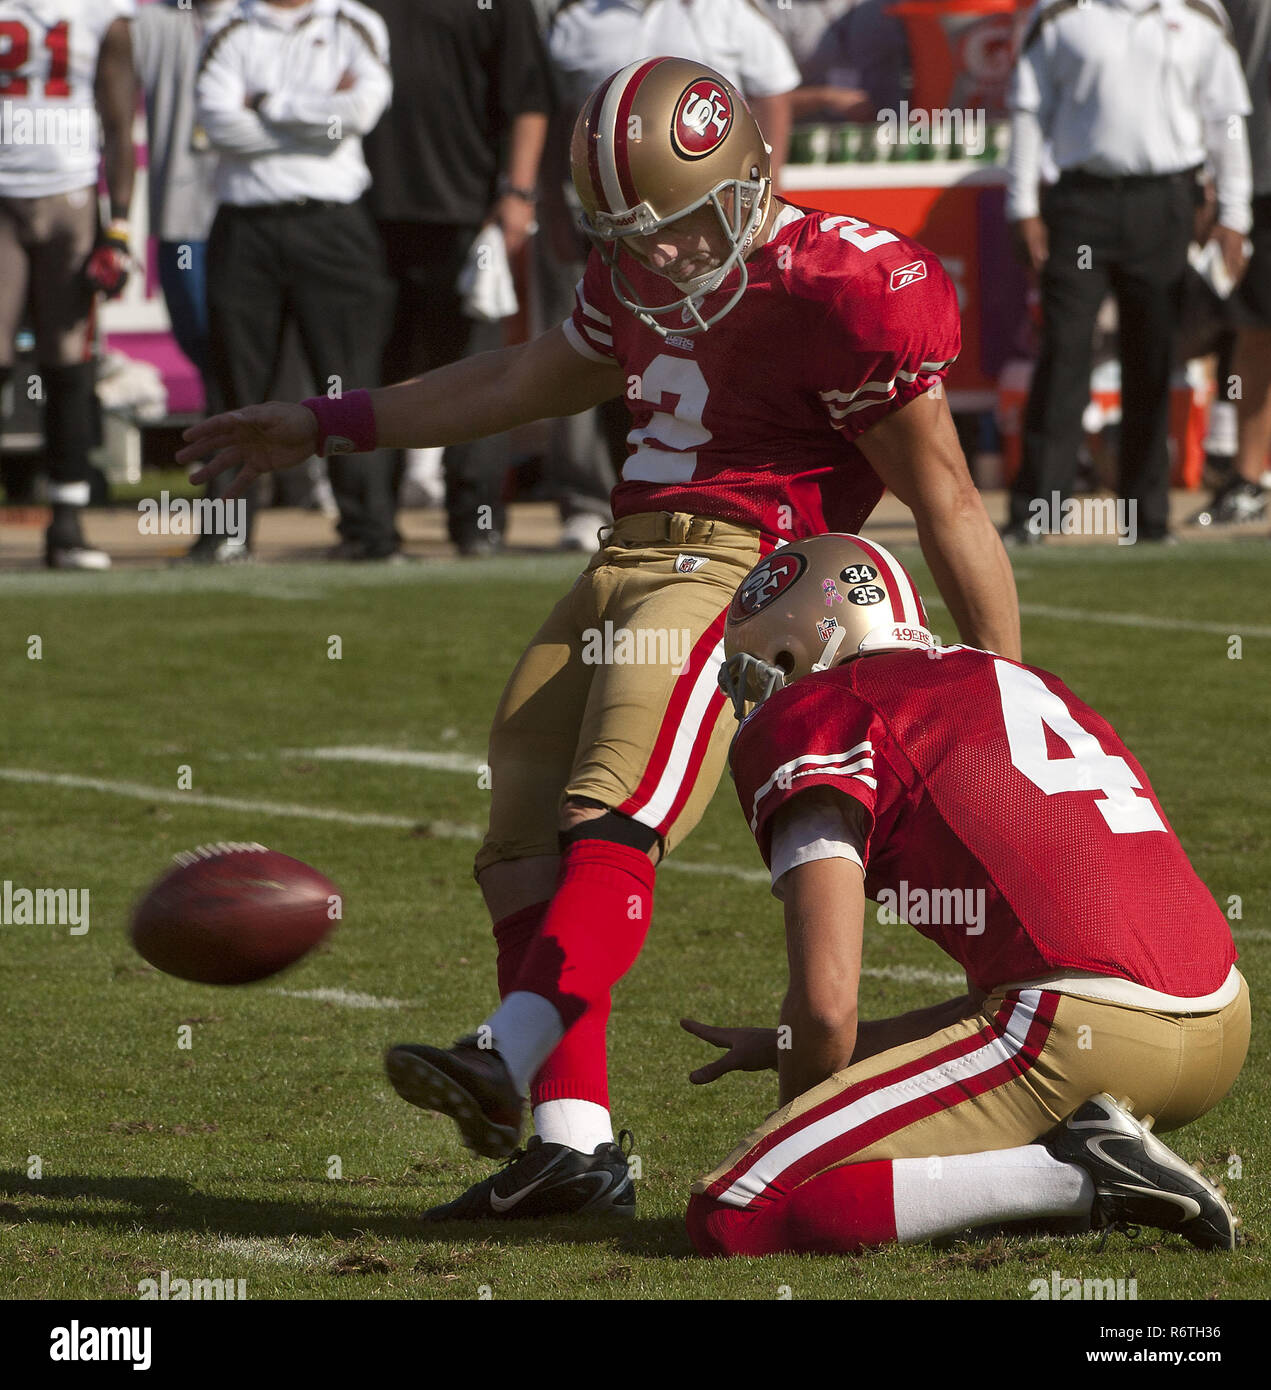 San Francisco, California, USA. 9th Oct, 2011. San Francisco 49ers kicker David Akers (2) kicks field goal with punter Andy Lee (4) holding on Sunday, October 9, 2011 at Candlestick Park, San Francisco, California. The 49ers defeated the Buccaneers 48-3. Credit: Al Golub/ZUMA Wire/Alamy Live News Stock Photo